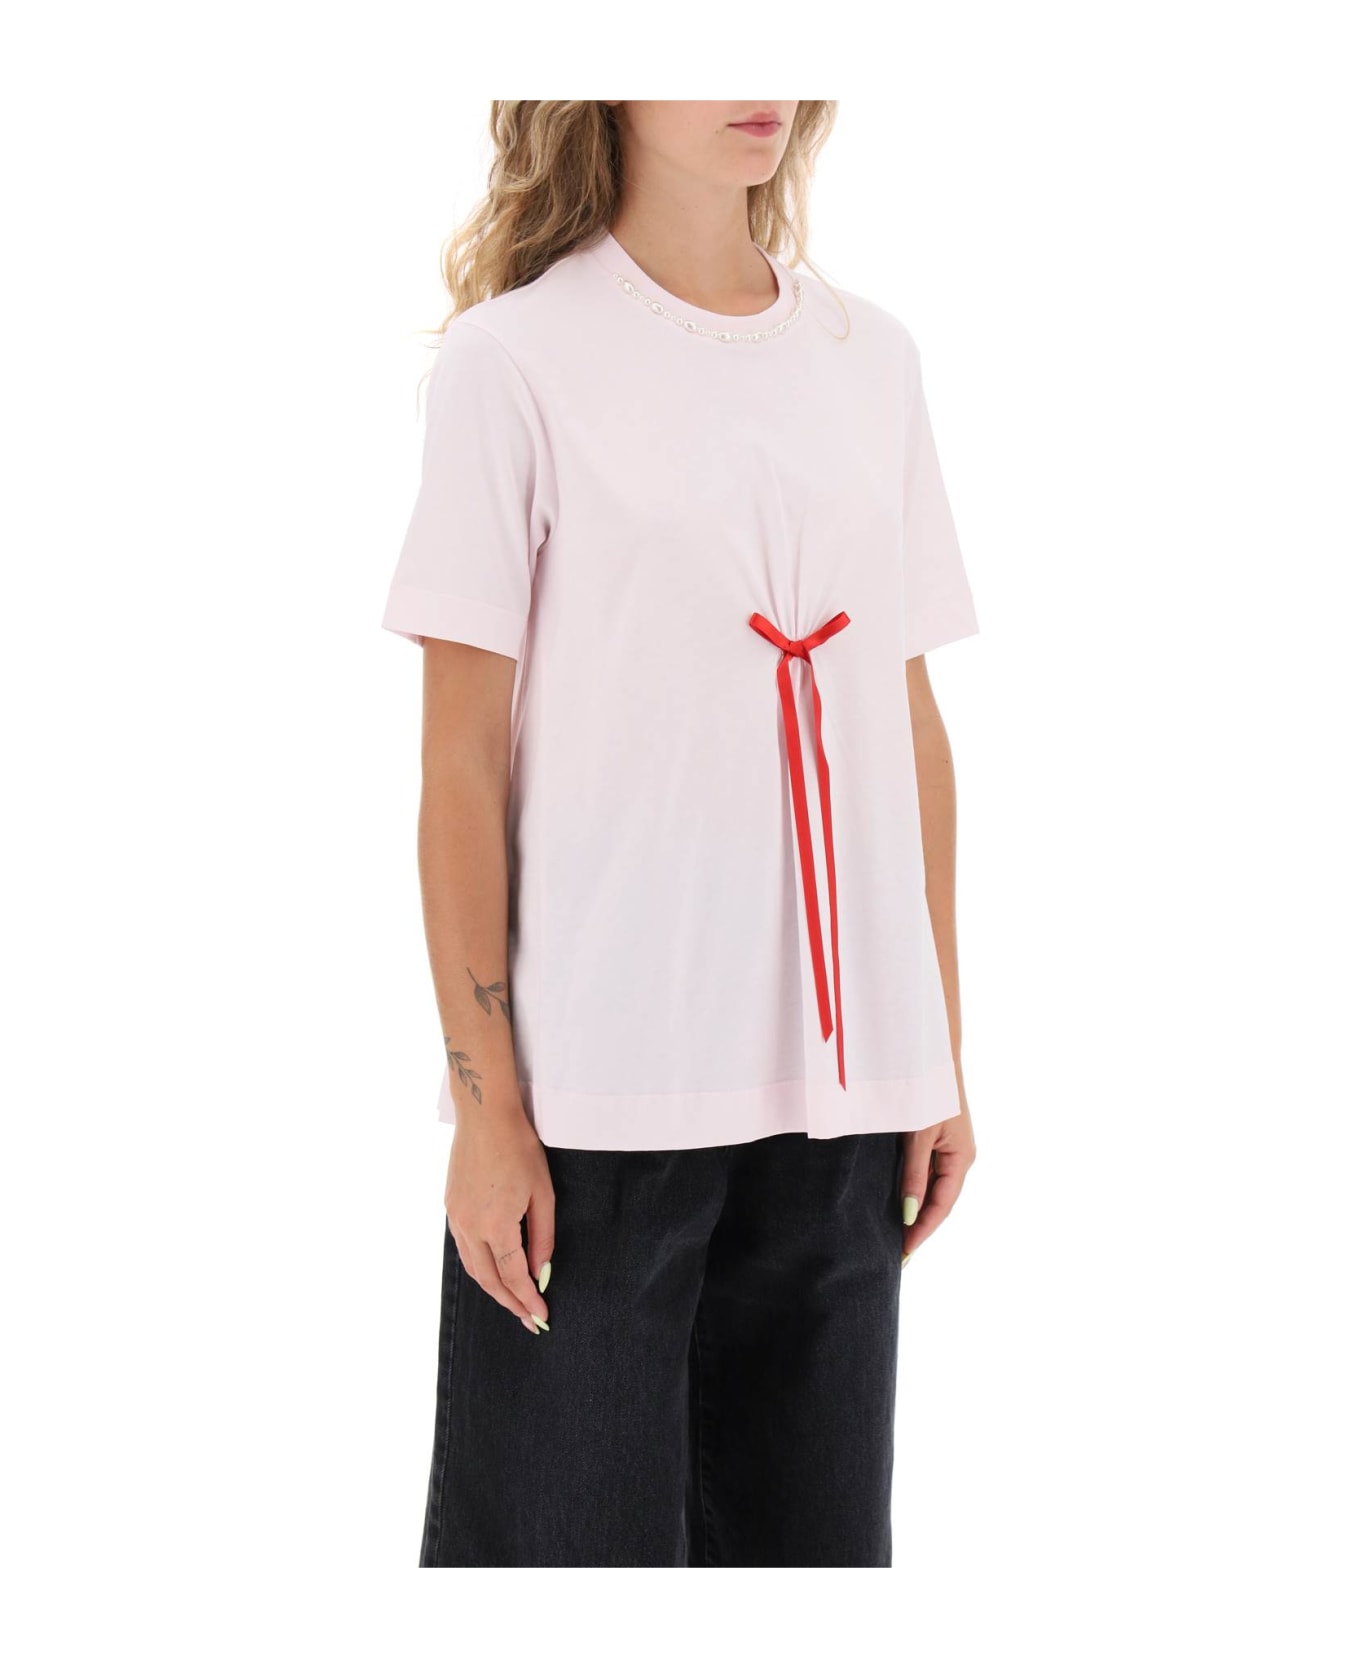 Simone Rocha A-line T-shirt With Bow Detail - PINK RED PEARL (Pink) ポロシャツ